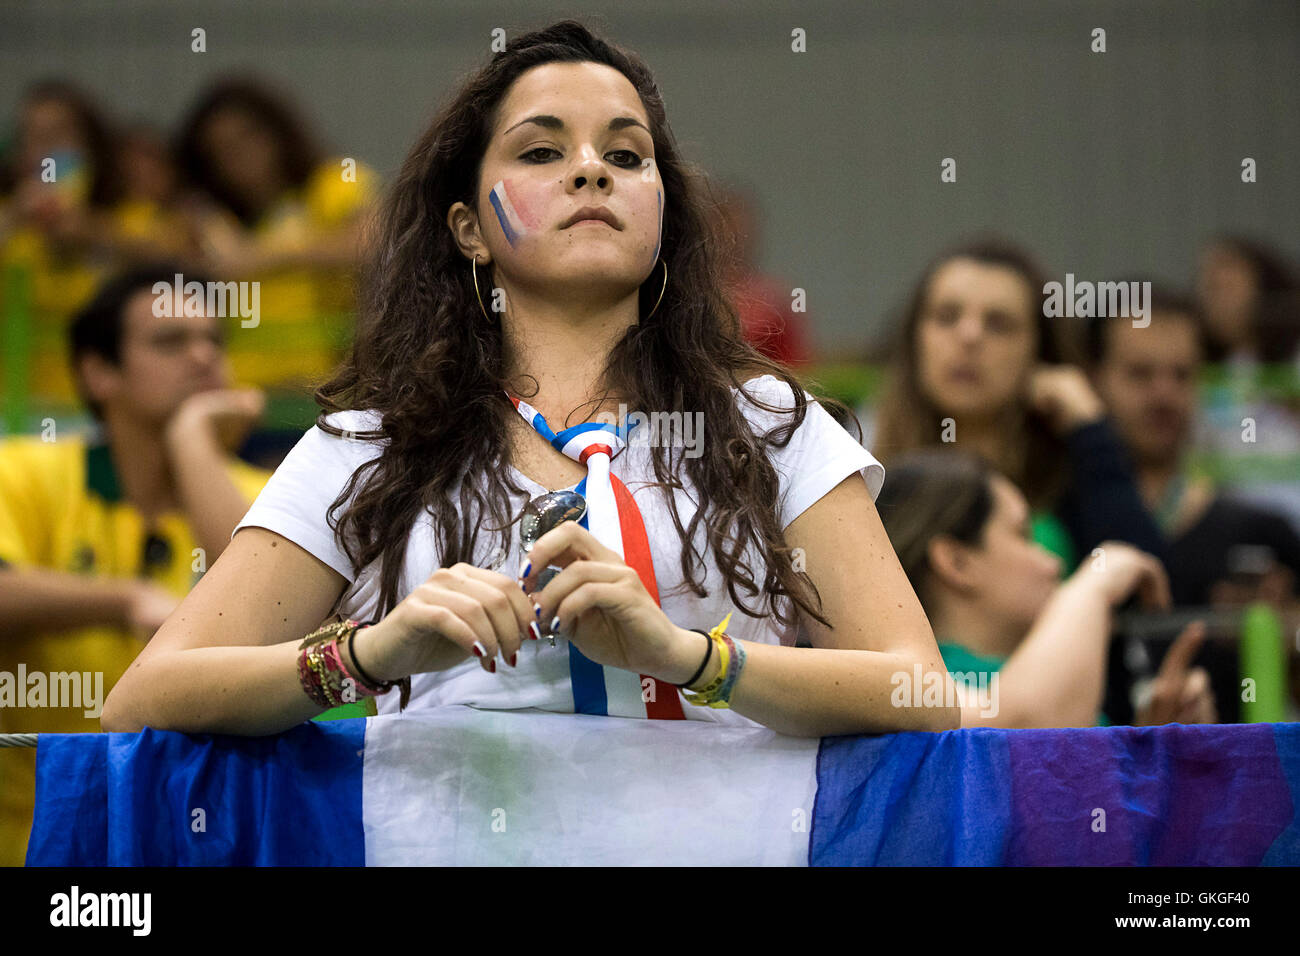 Rio De Janerio, RJ, Brazil. 20th Aug, 2016. OLYMPICS HANDBALL: French fans watches team leave the court after losing to Russia in the Women's Handball Finals gold medal match at Future Arena during the 2016 Rio Summer Olympics games. Credit:  Paul Kitagaki Jr./ZUMA Wire/Alamy Live News Stock Photo